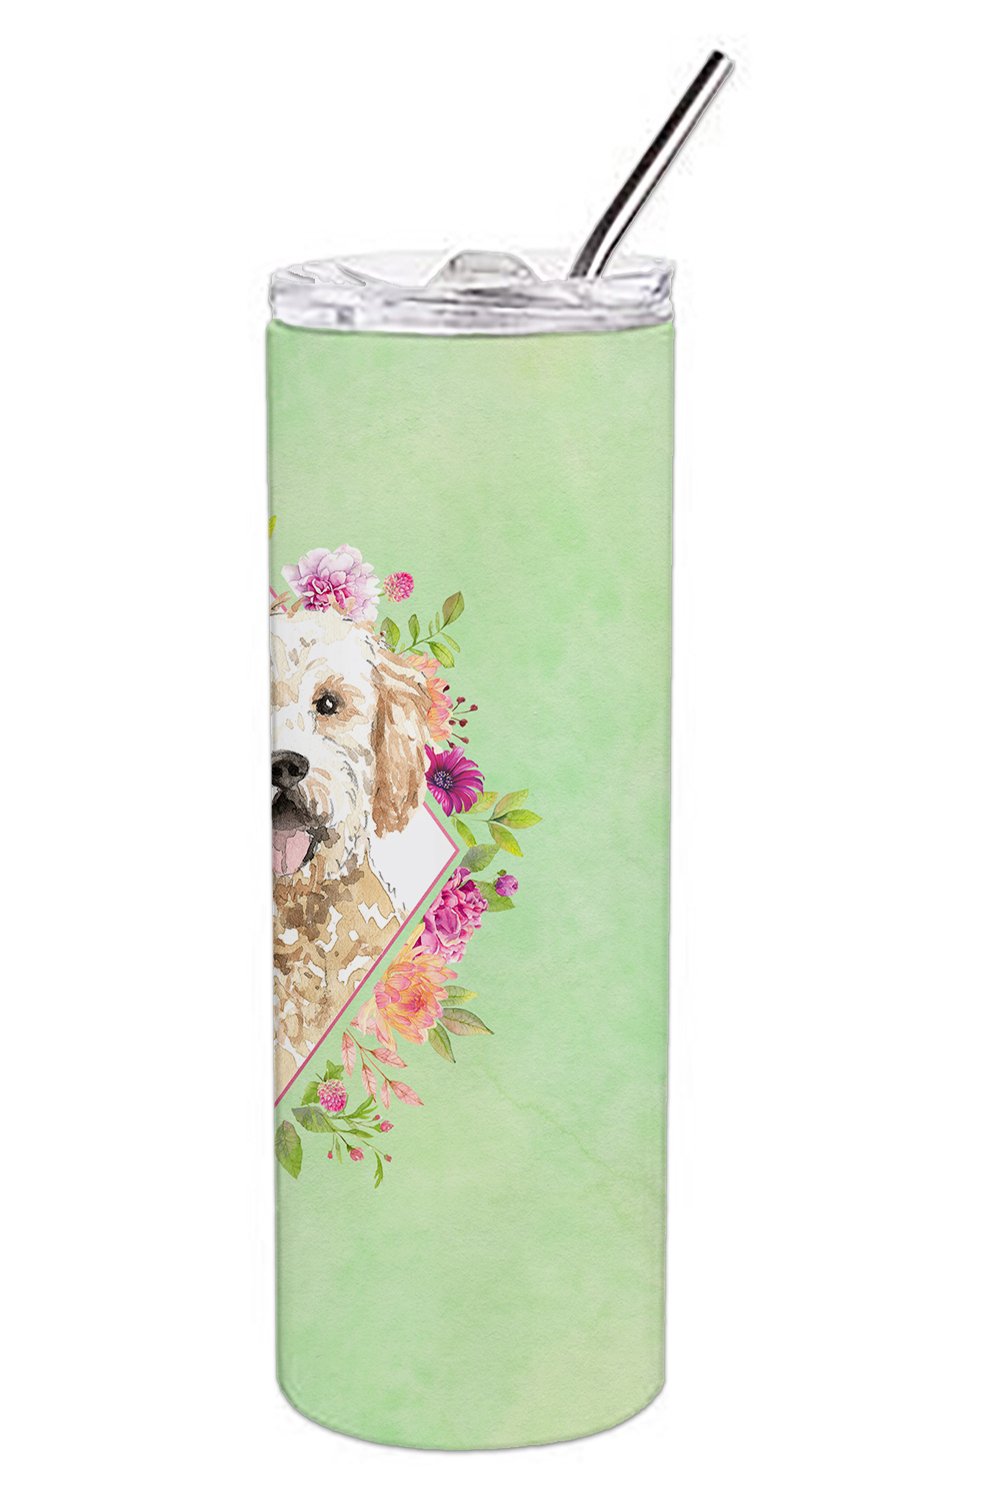 Goldendoodle Green Flowers Double Walled Stainless Steel 20 oz Skinny Tumbler CK4396TBL20 by Caroline's Treasures